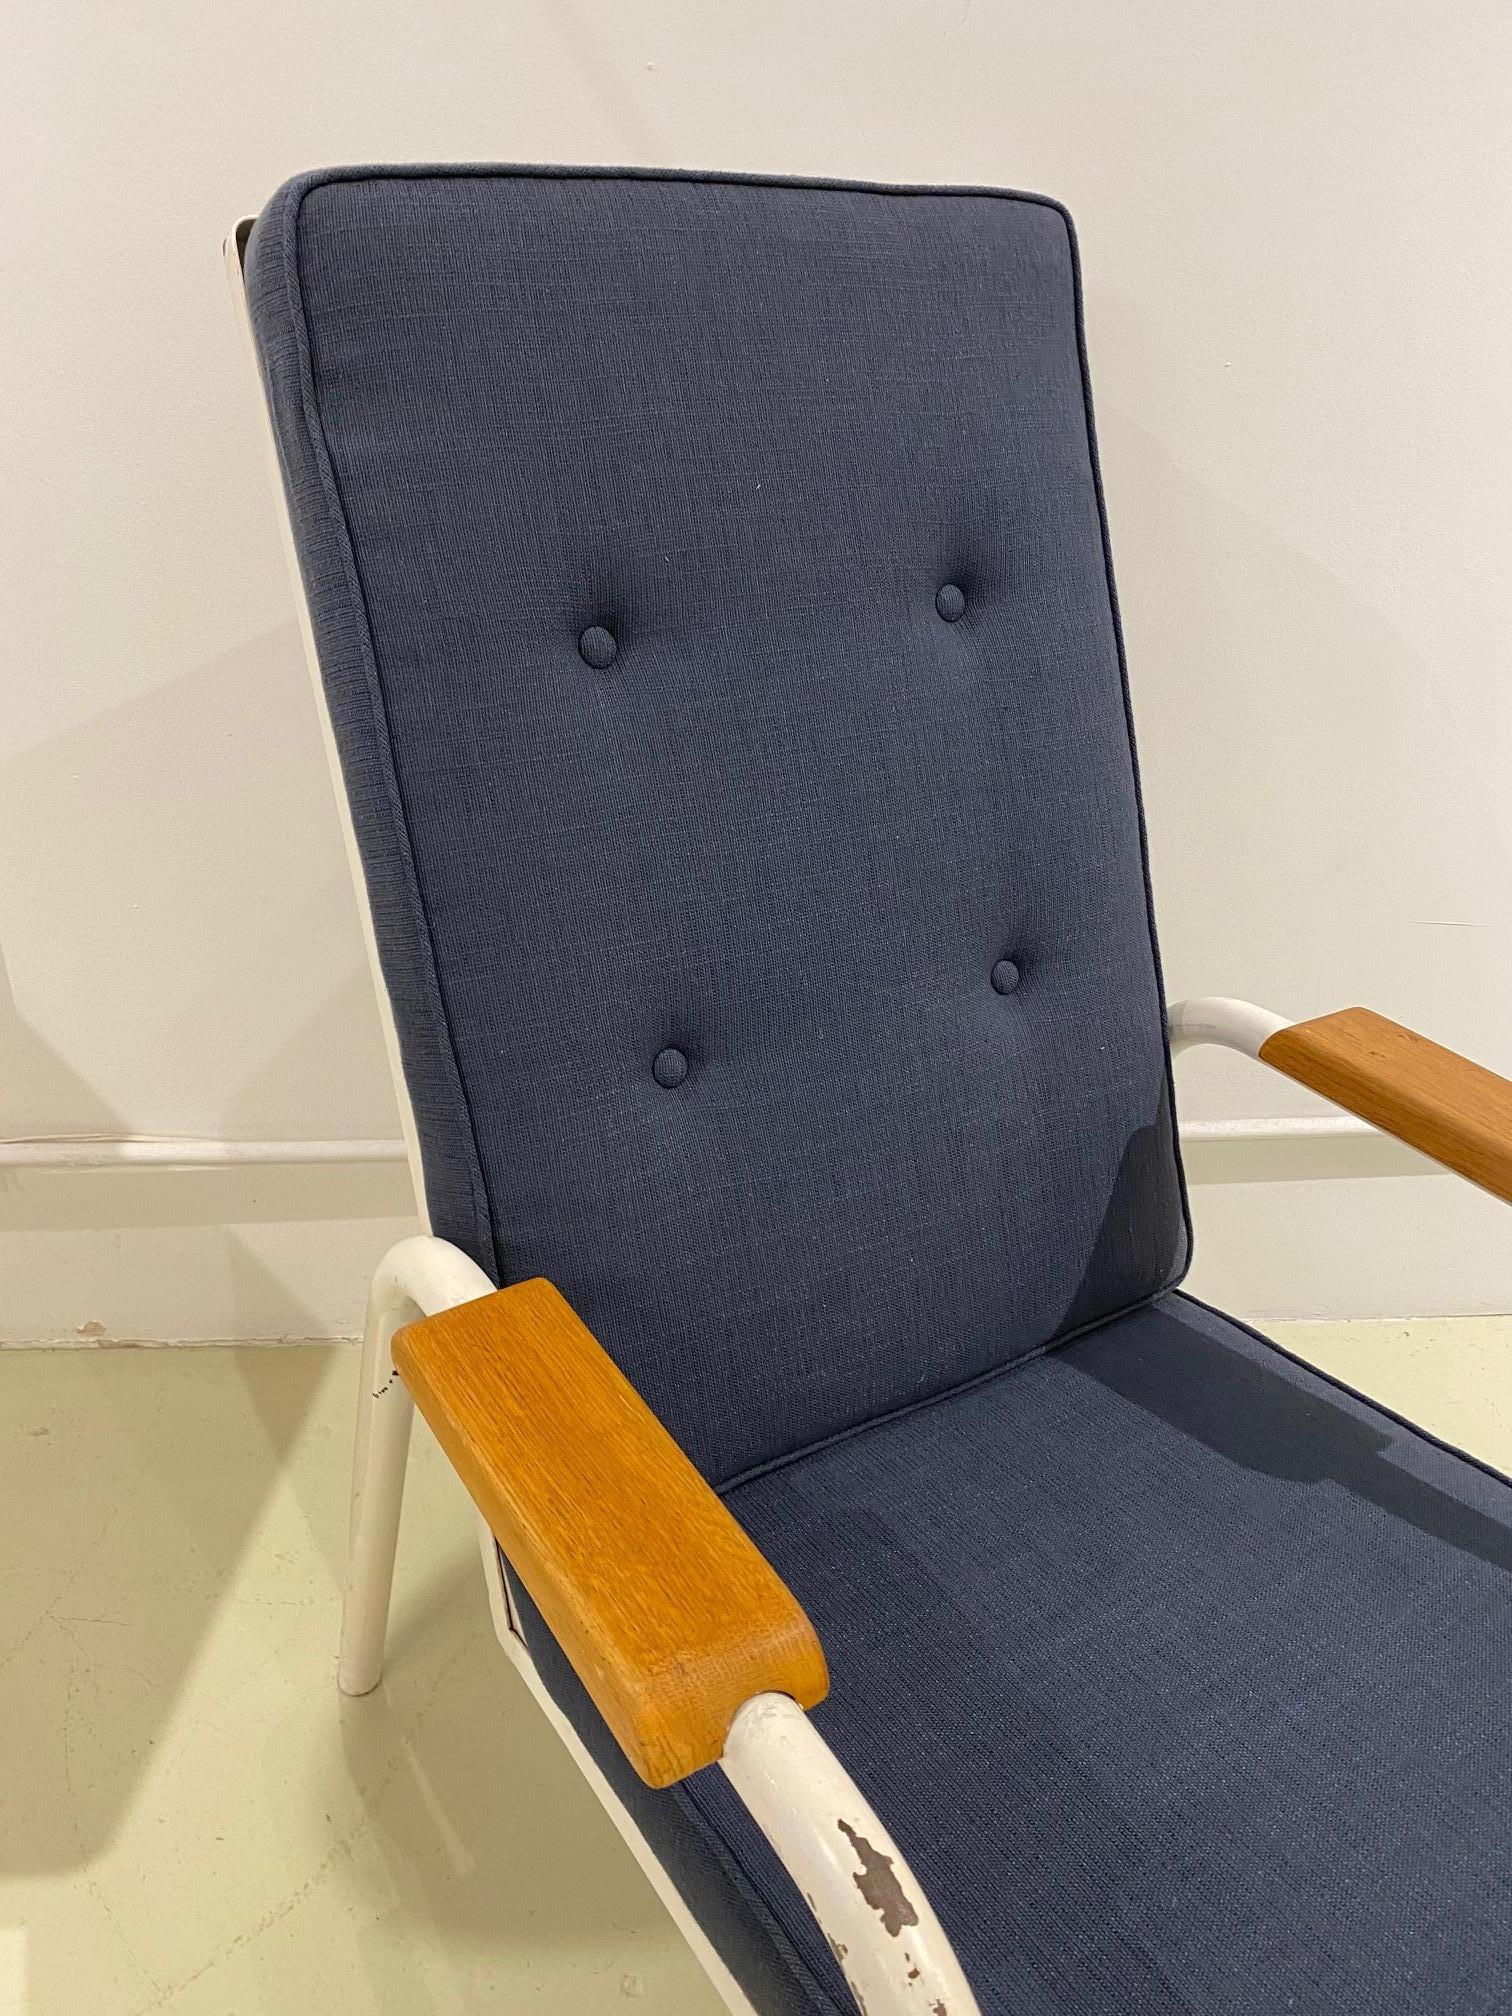 Jean Prouve Lounge Chair, 1949 For Sale 1